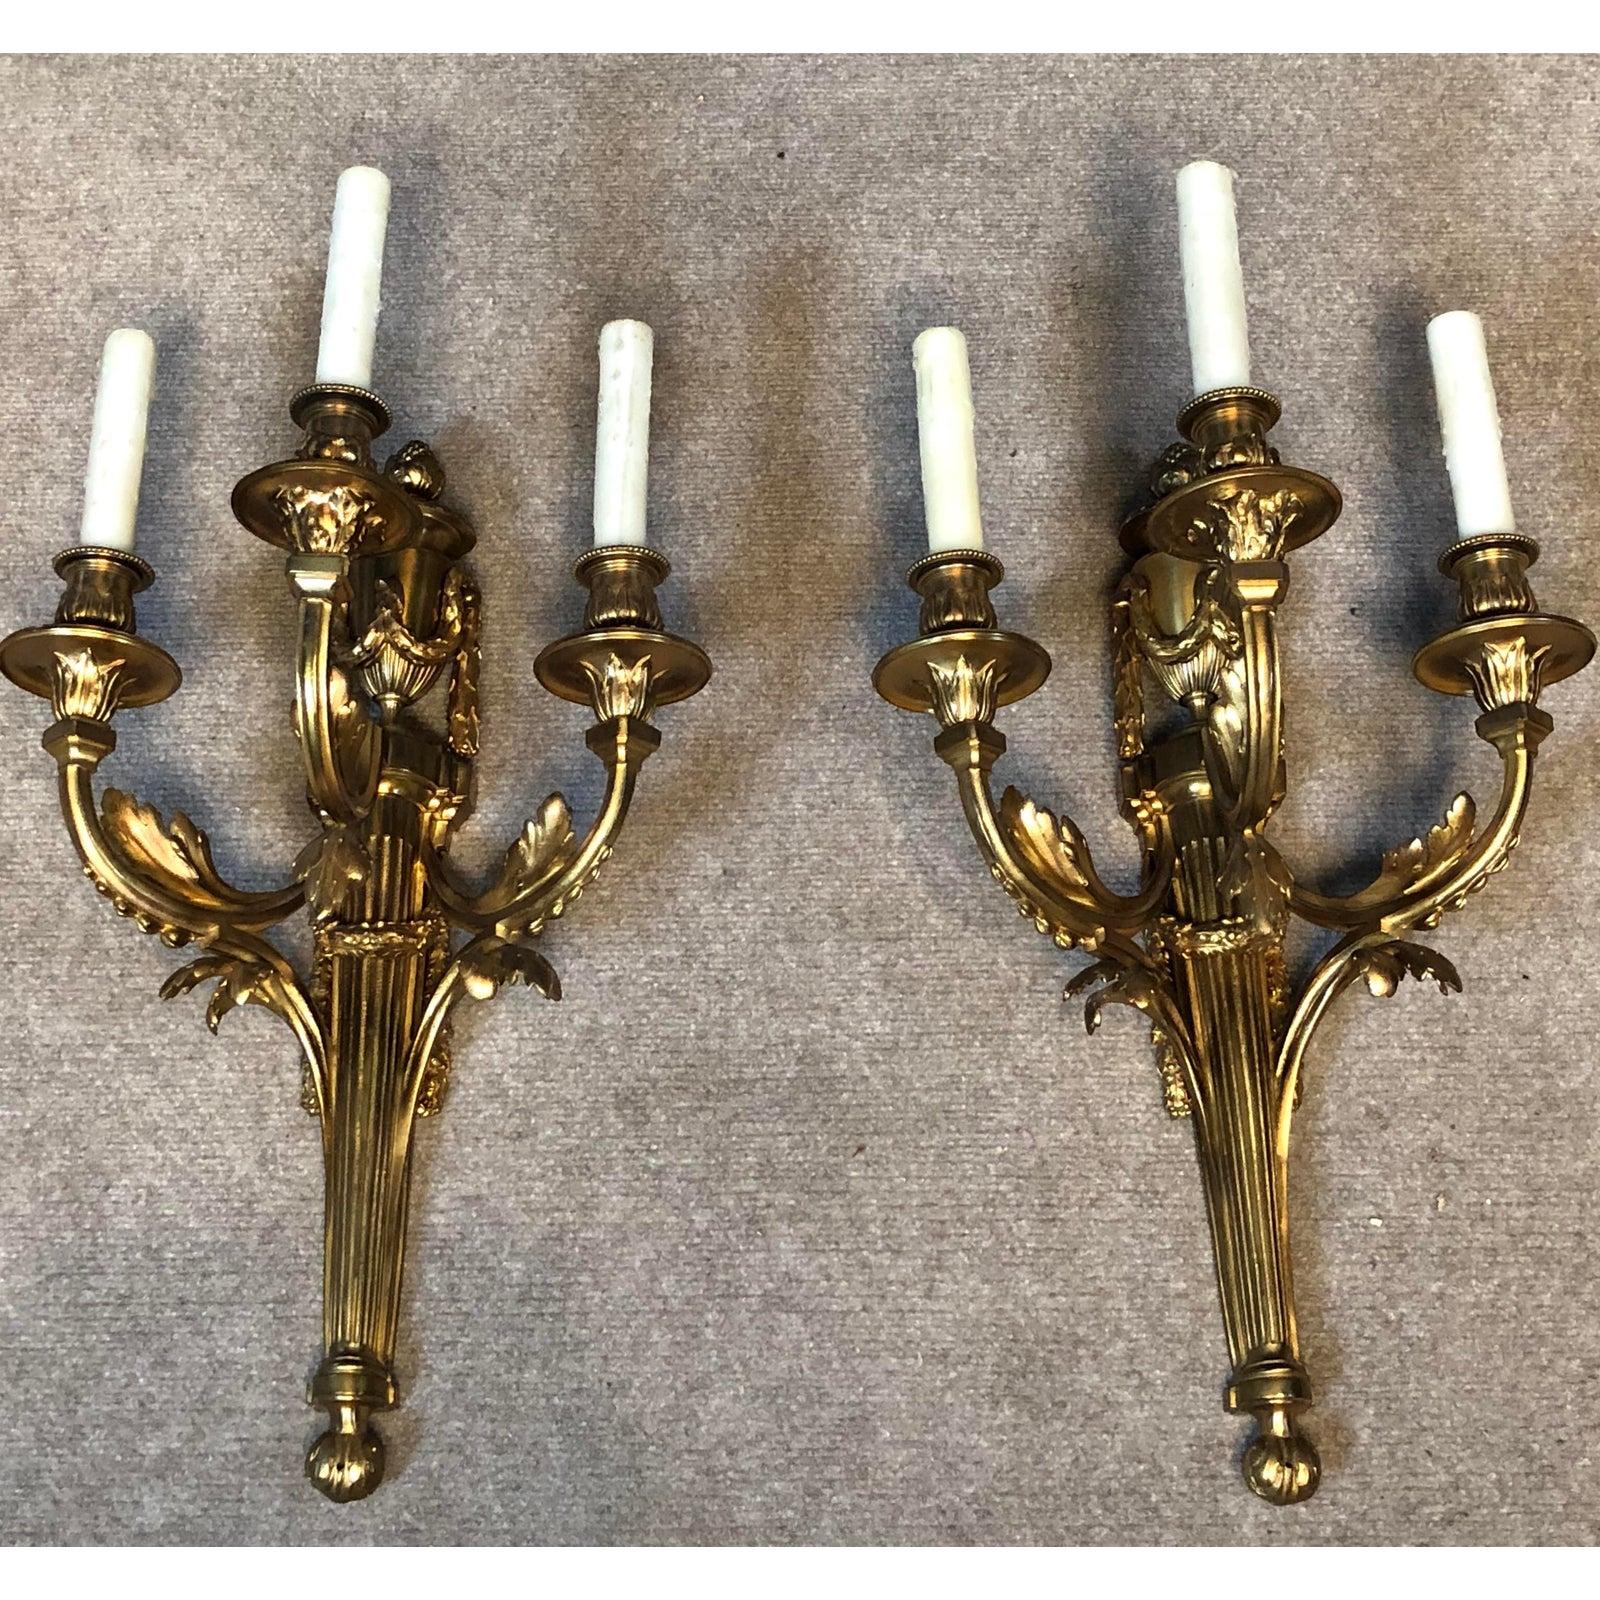 Pair of Louis XVI three arm gilt bronze wall sconces. French, 19th century. Fine quality bronze work. Urn and garland form top. Wired